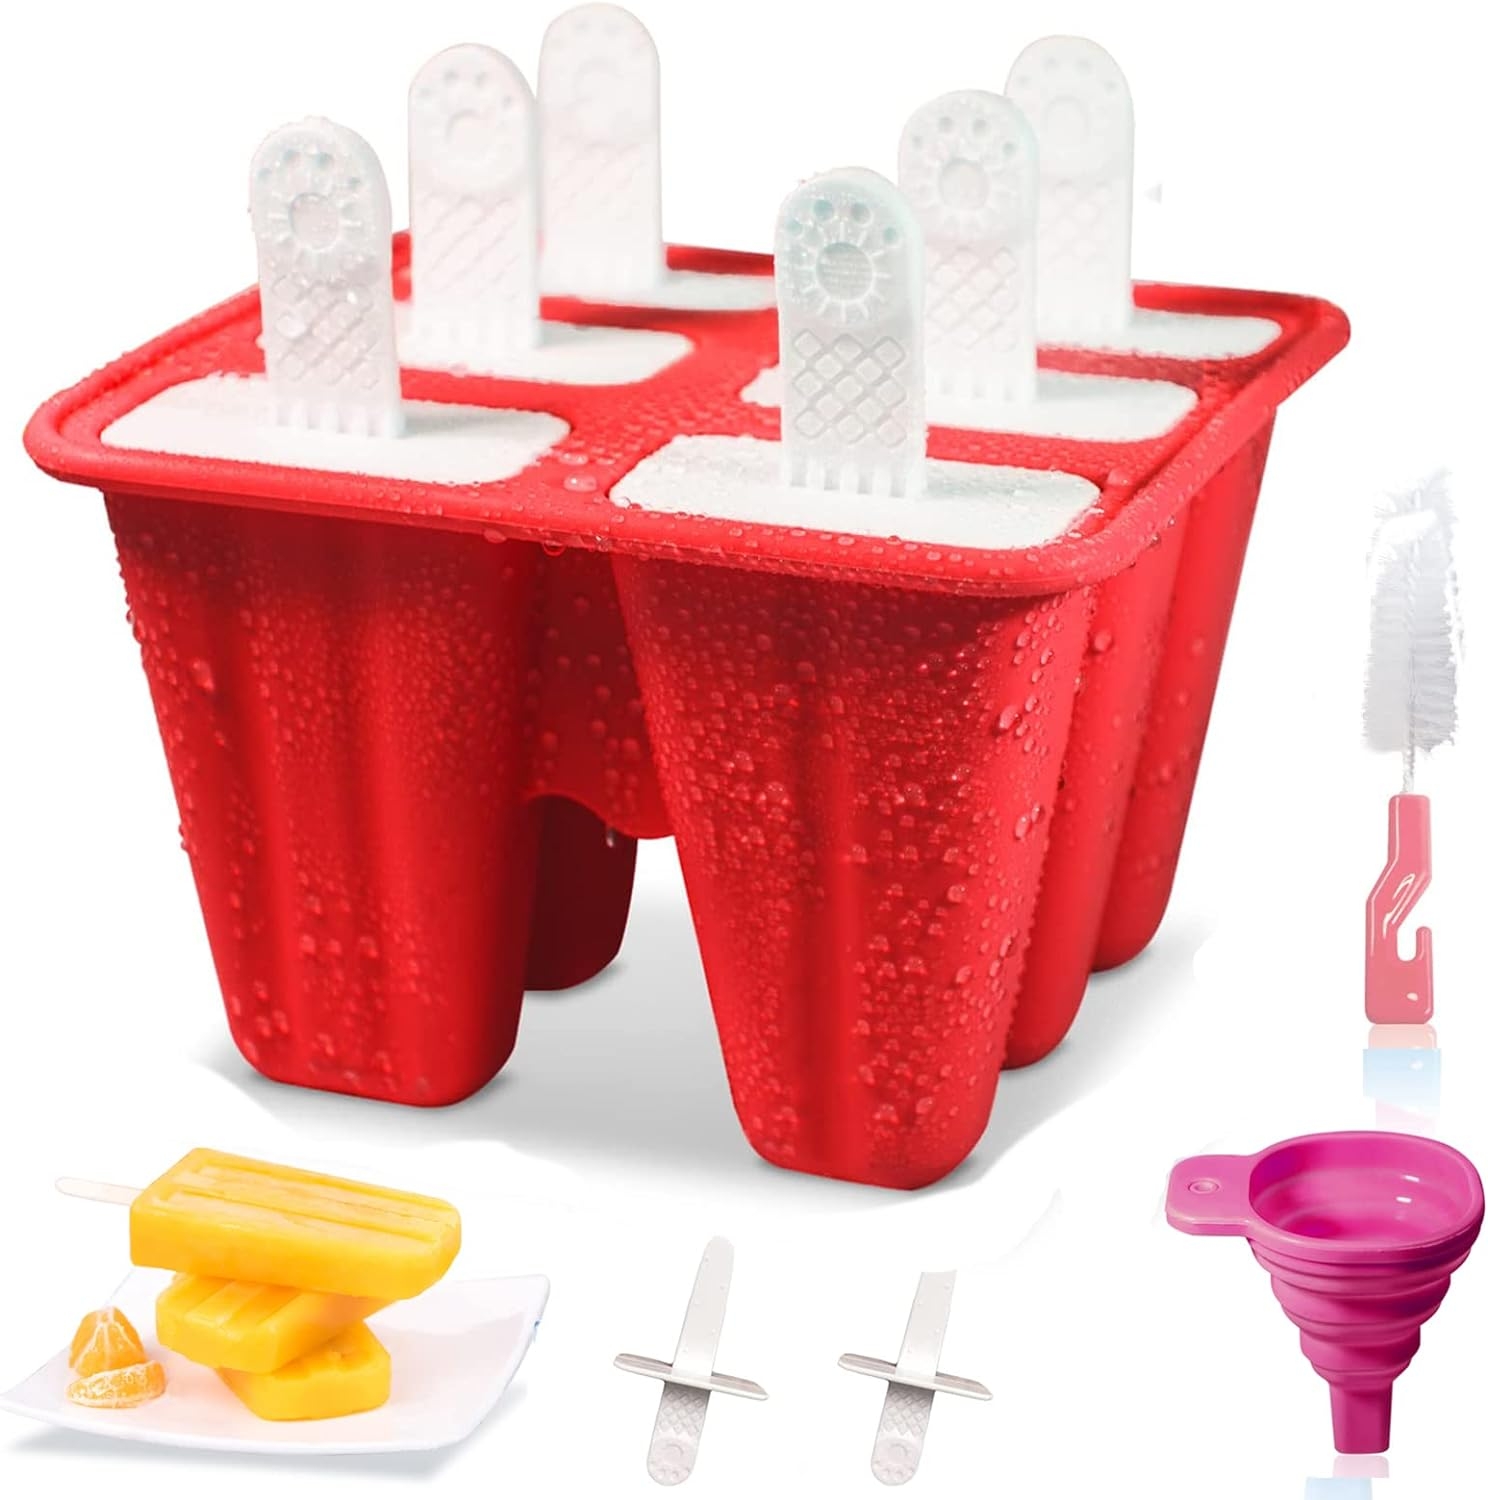 Popcical Mold Maker, Reusable Ice Pop Molds Trays for Homemade